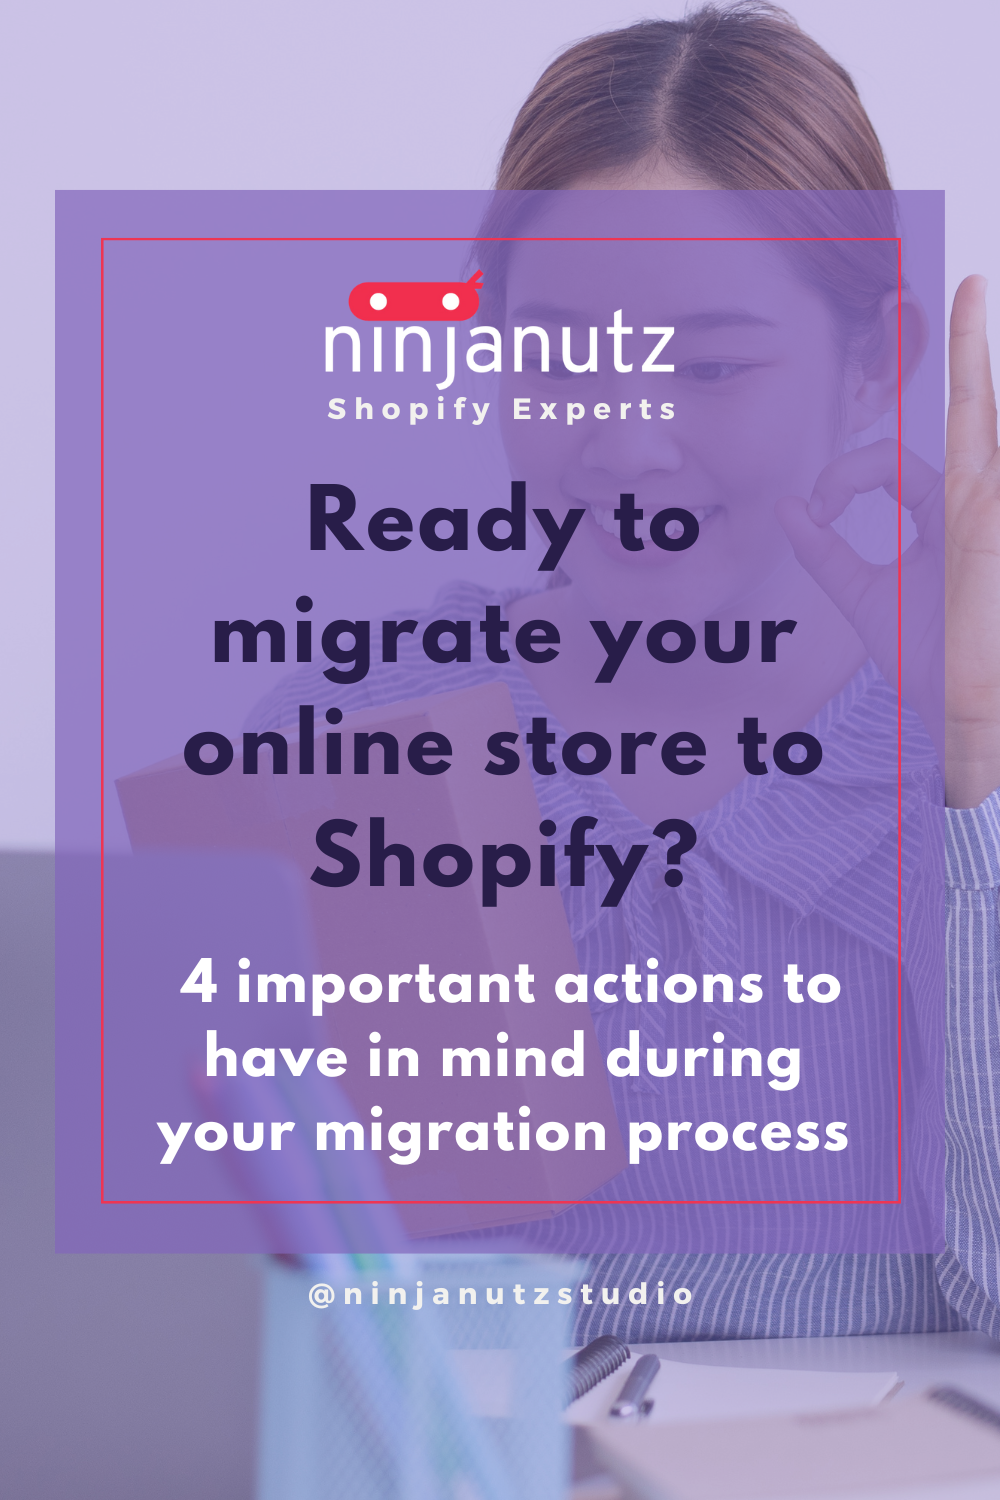 Ready to migrate your online store to Shopify? 4 important actions to have in mind during your migration process NinjaNutz®